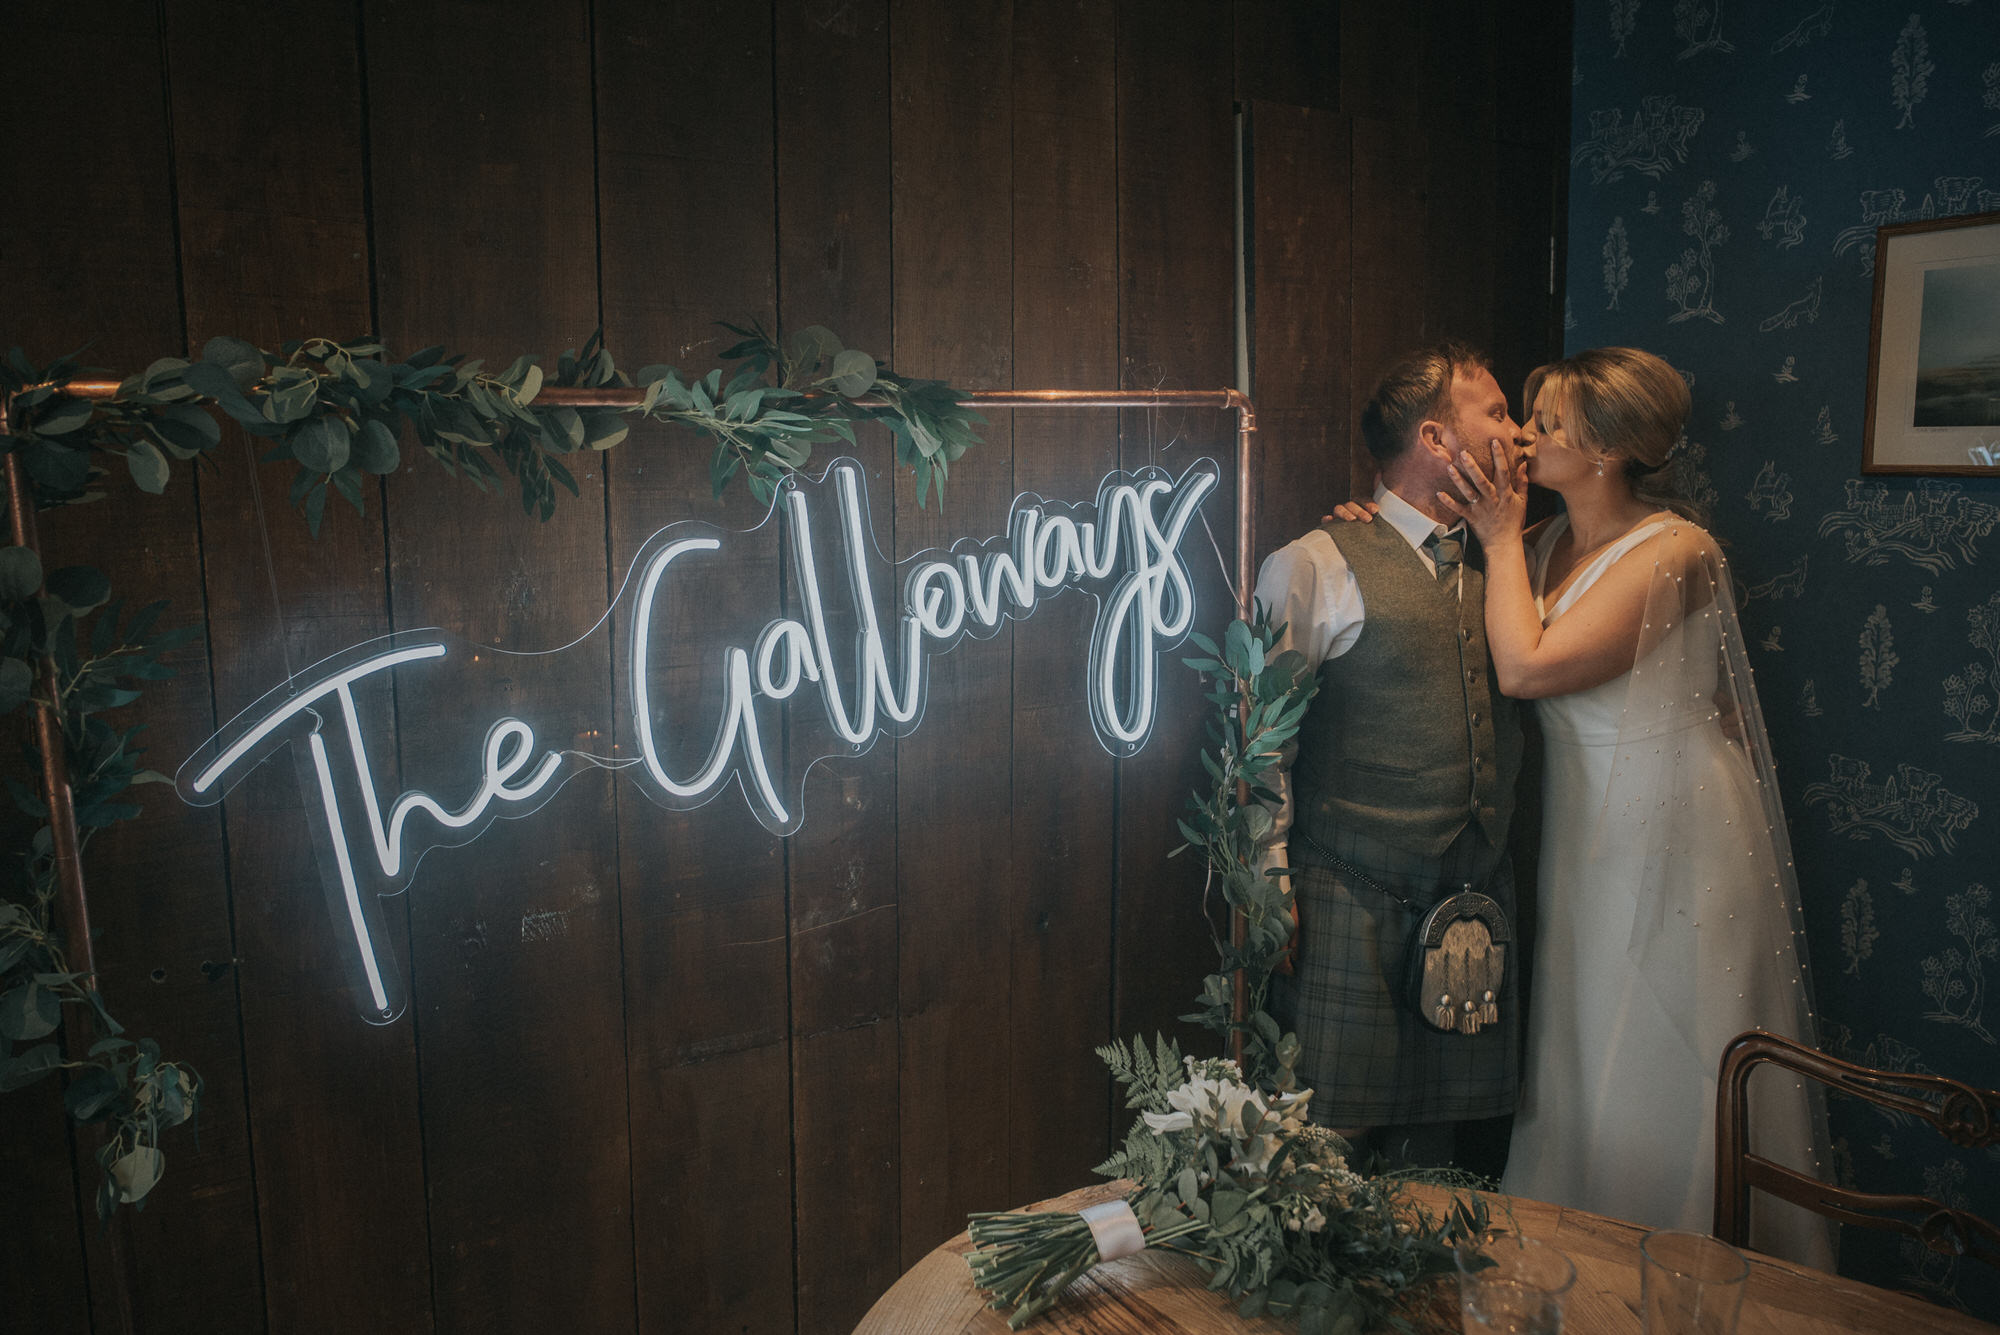 The bride and groom kiss beside the neon The Galloways Sign